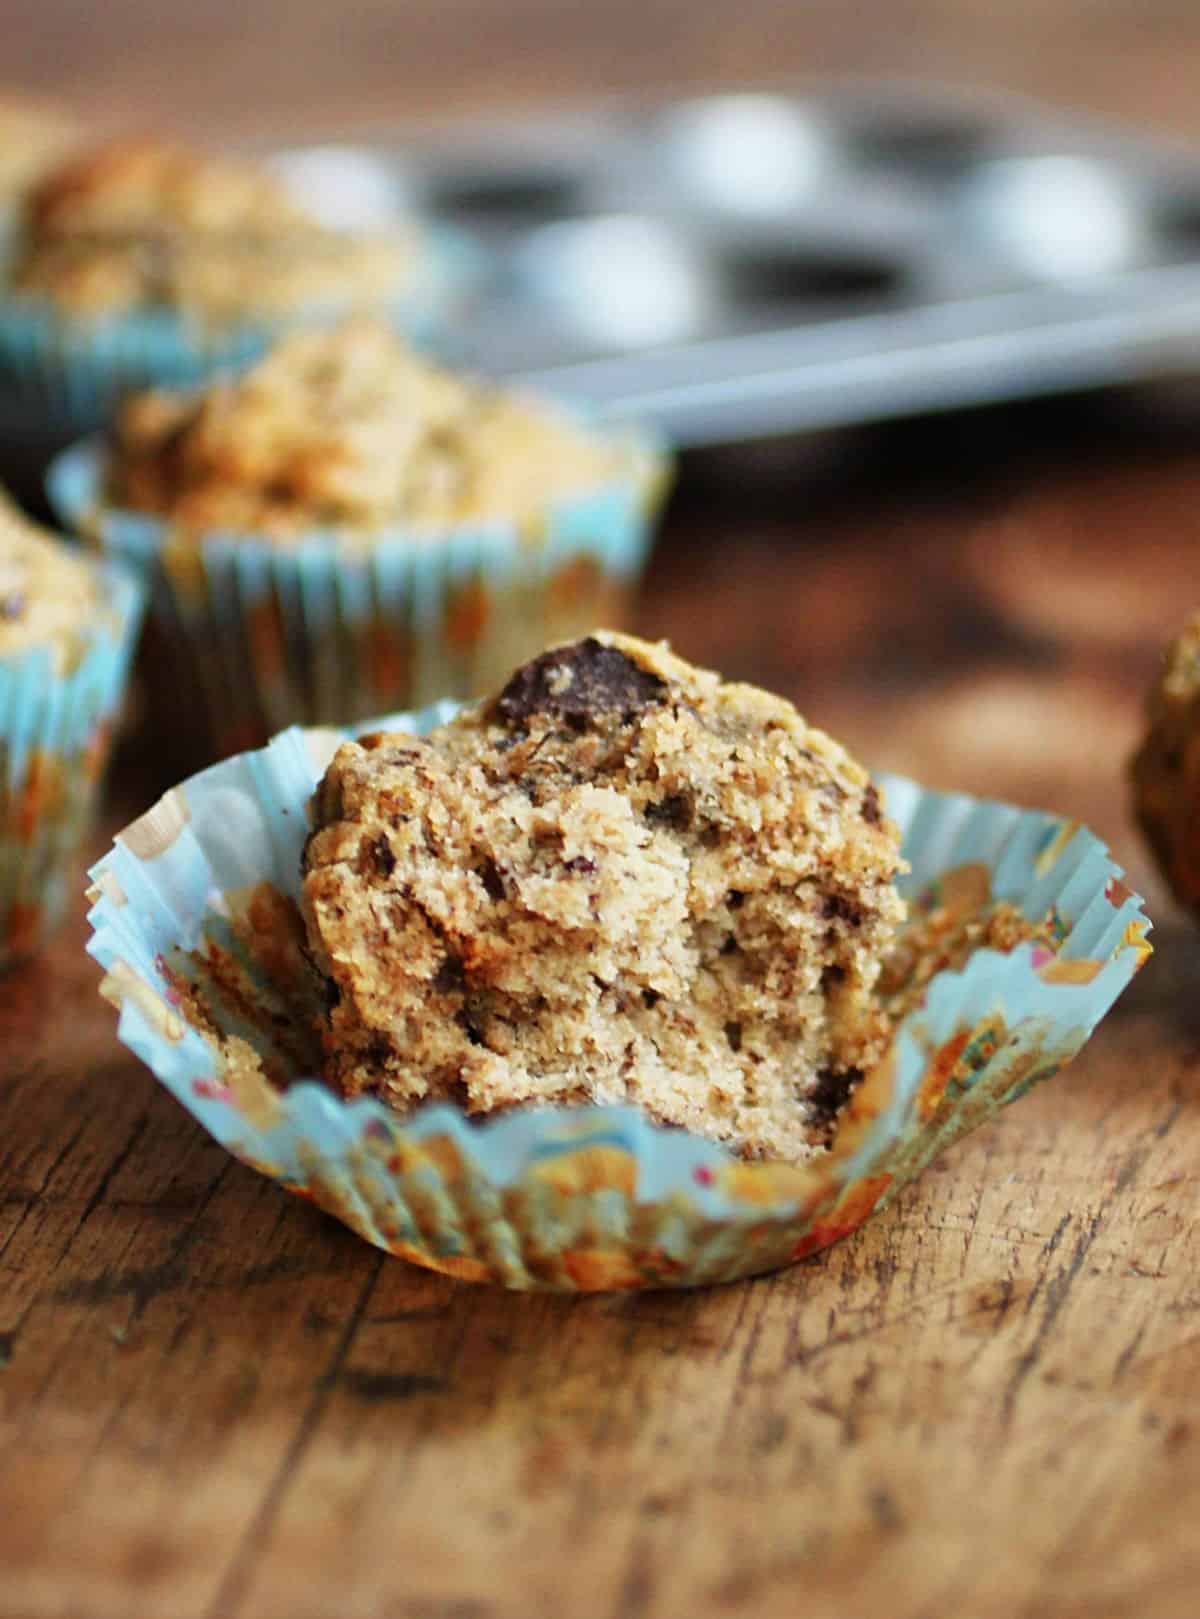 Half a banana chocolate chip muffin in opened blue paper liner on a wooden board. Pan and muffins in background. 